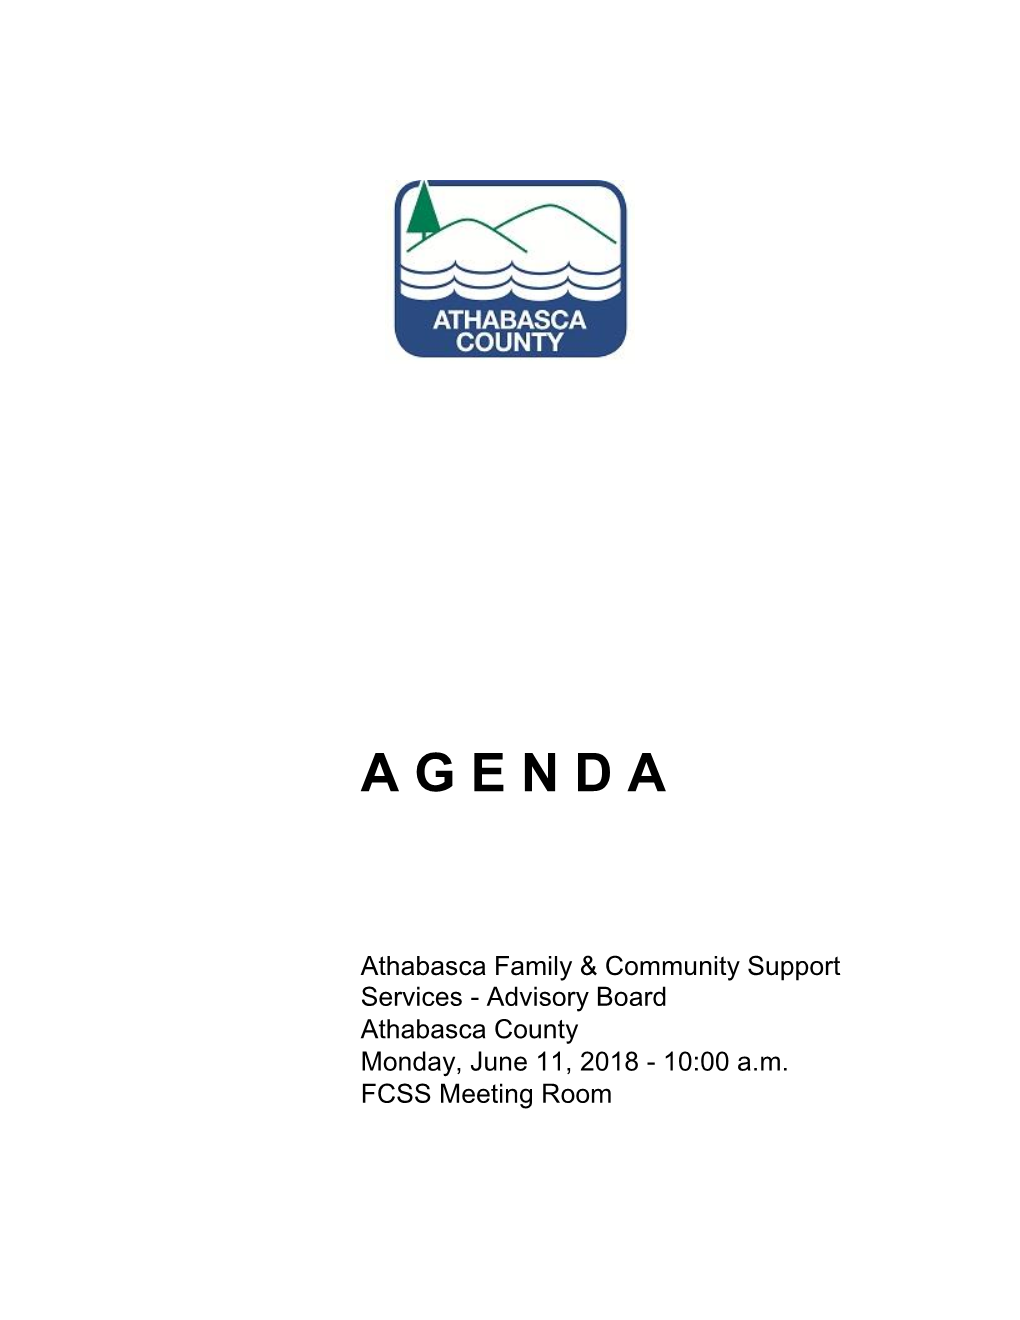 Athabasca Family & Community Support Services